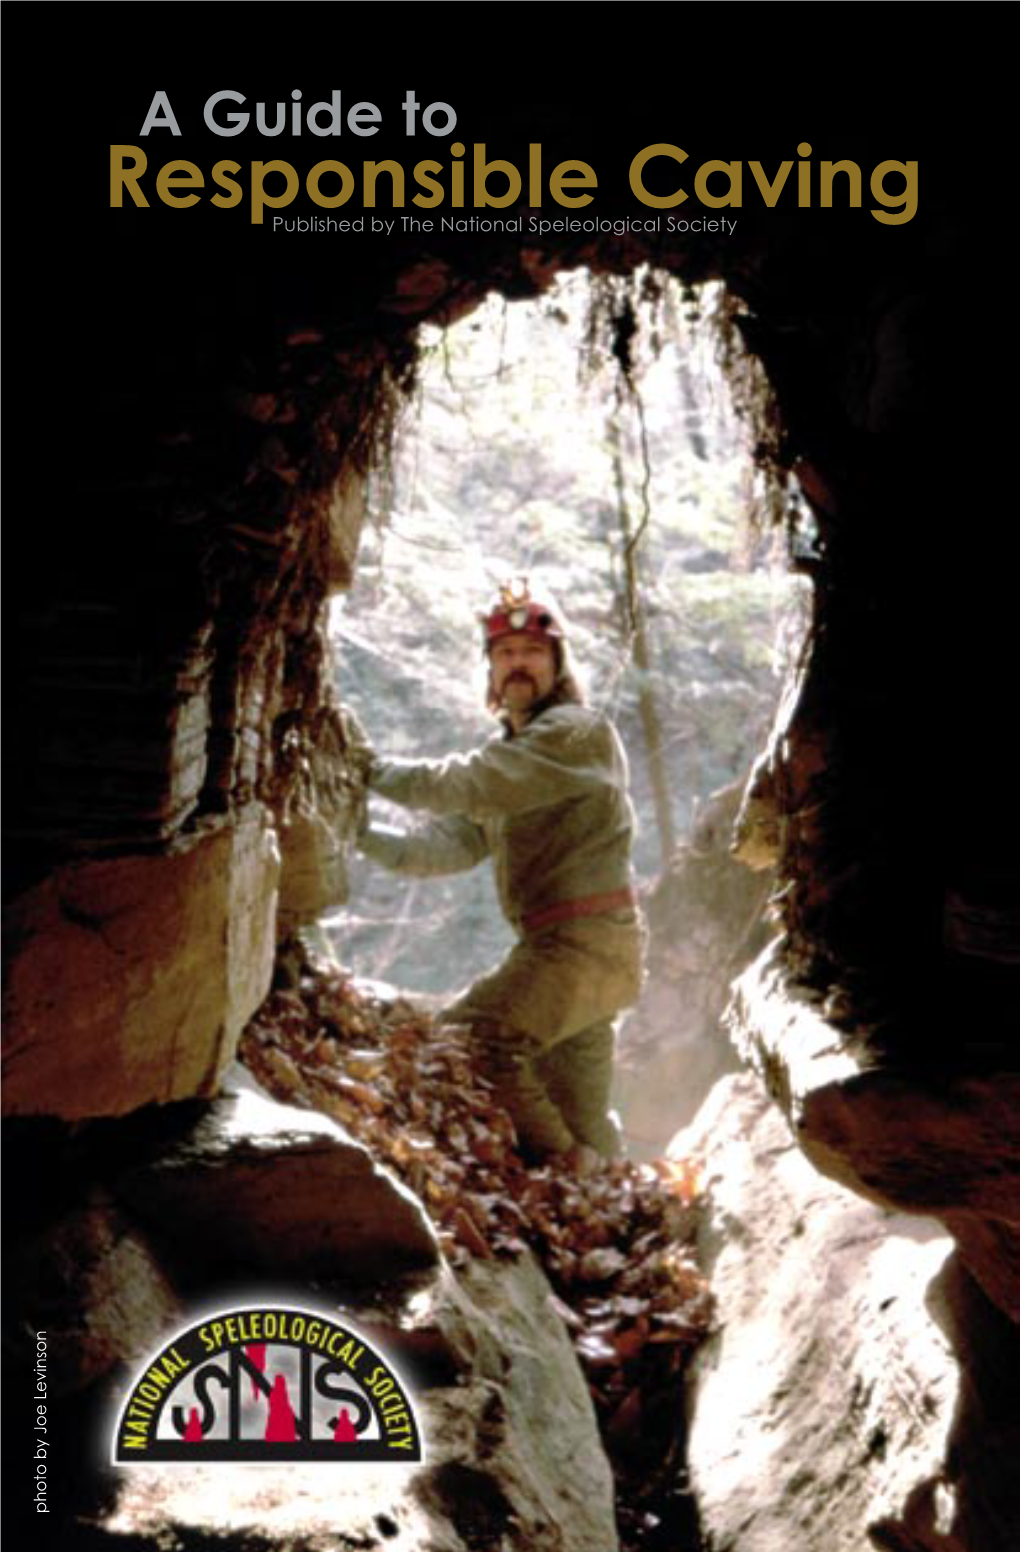 Responsible Caving Published by the National Speleological Society Photo by Joe Levinson a Guide to Responsible Caving